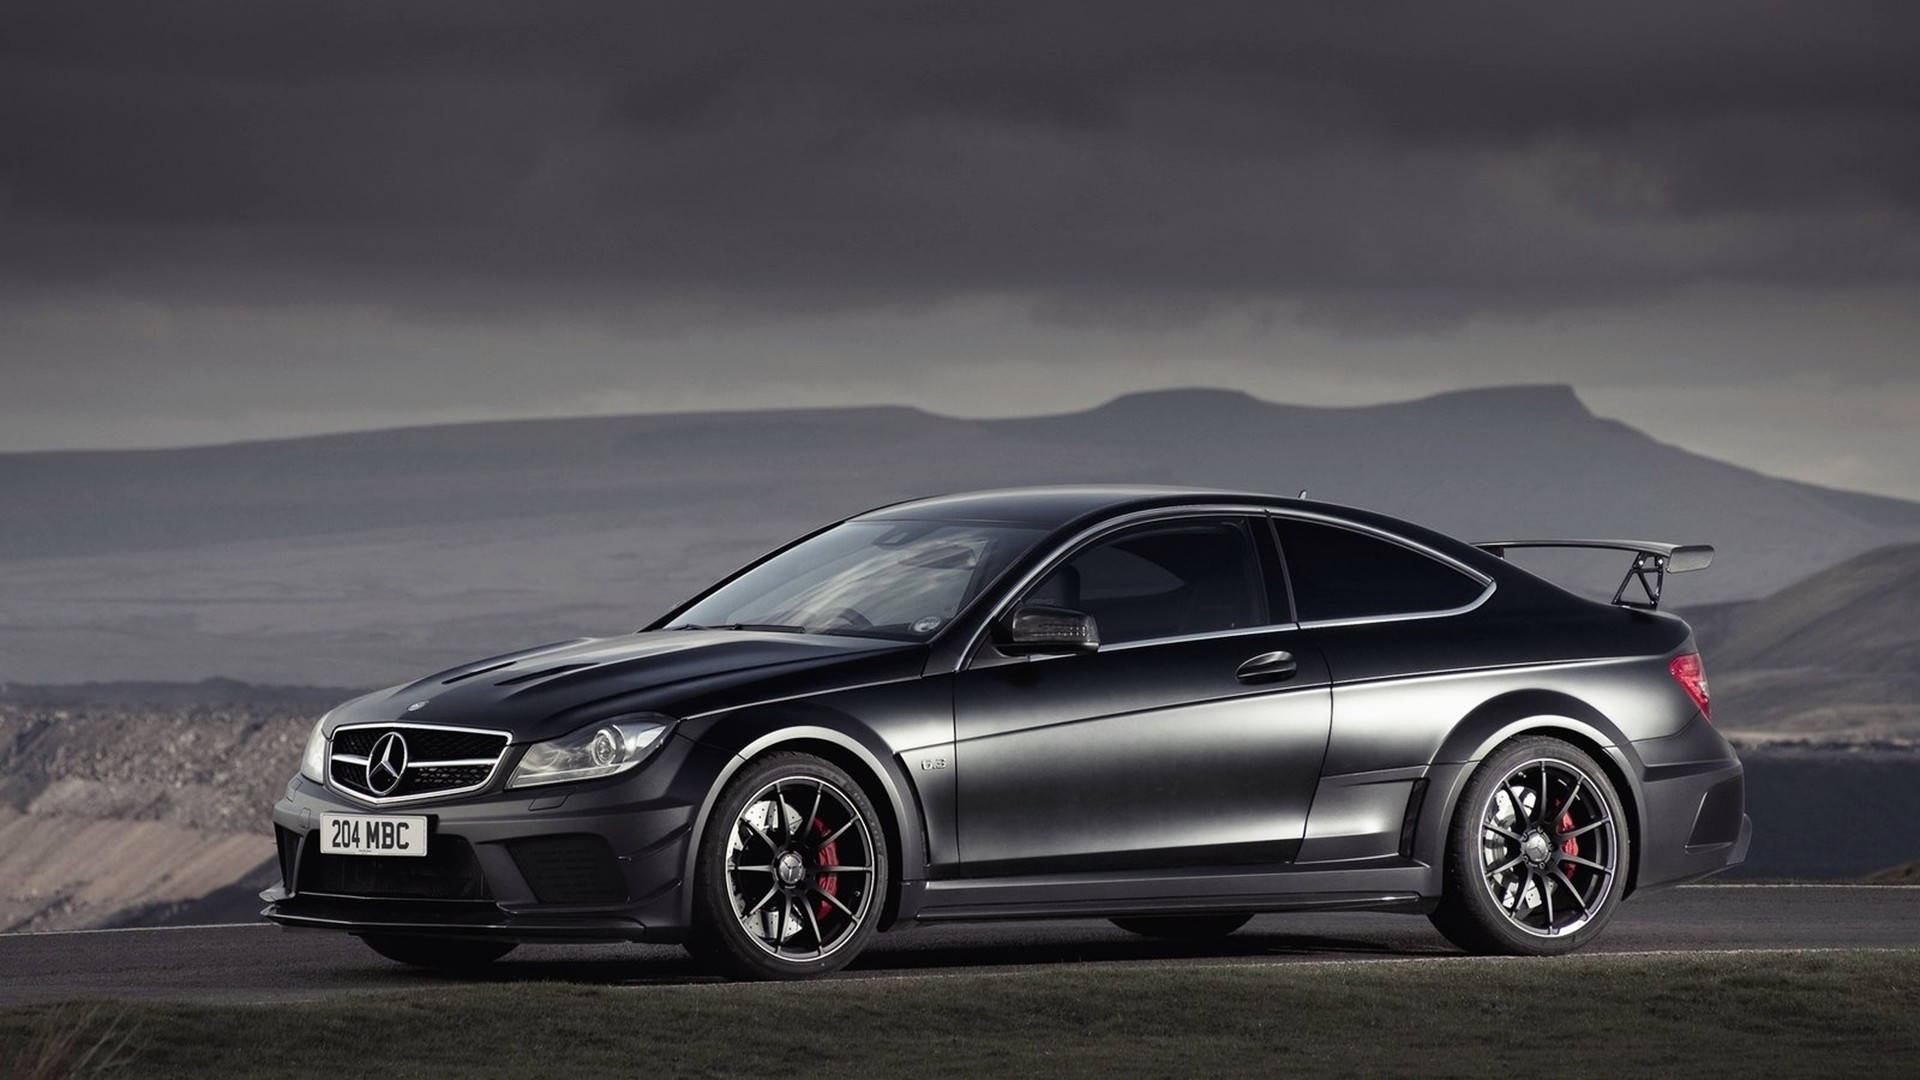 Impress Your Friends With An Unforgettable Mercedes-Benz AMG Wallpaper